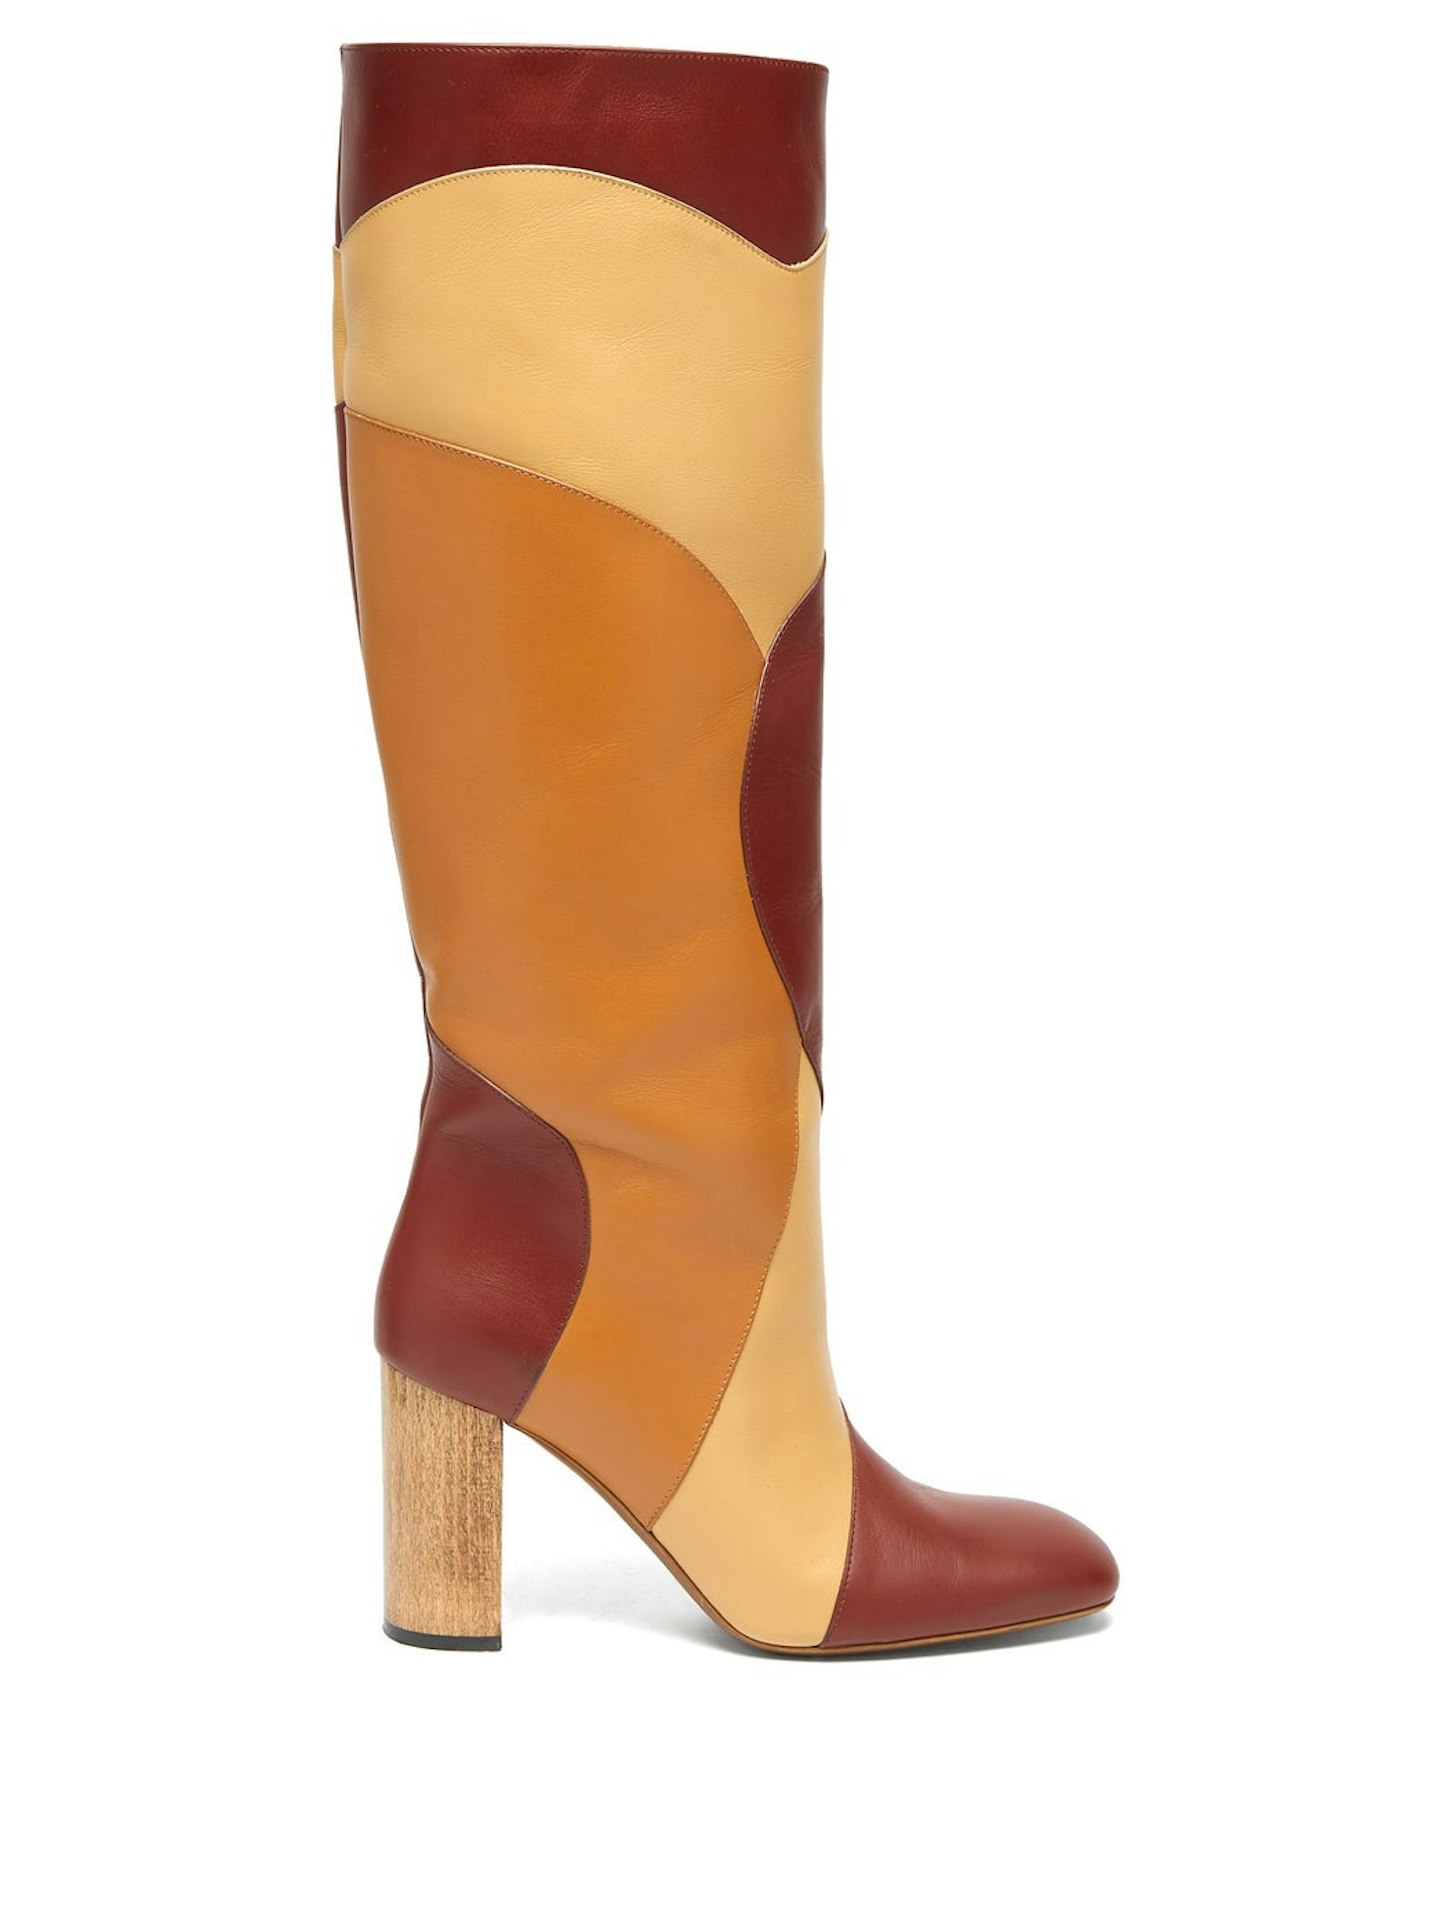 Ssone, Tina knee-high patchwork-leather boots, £895